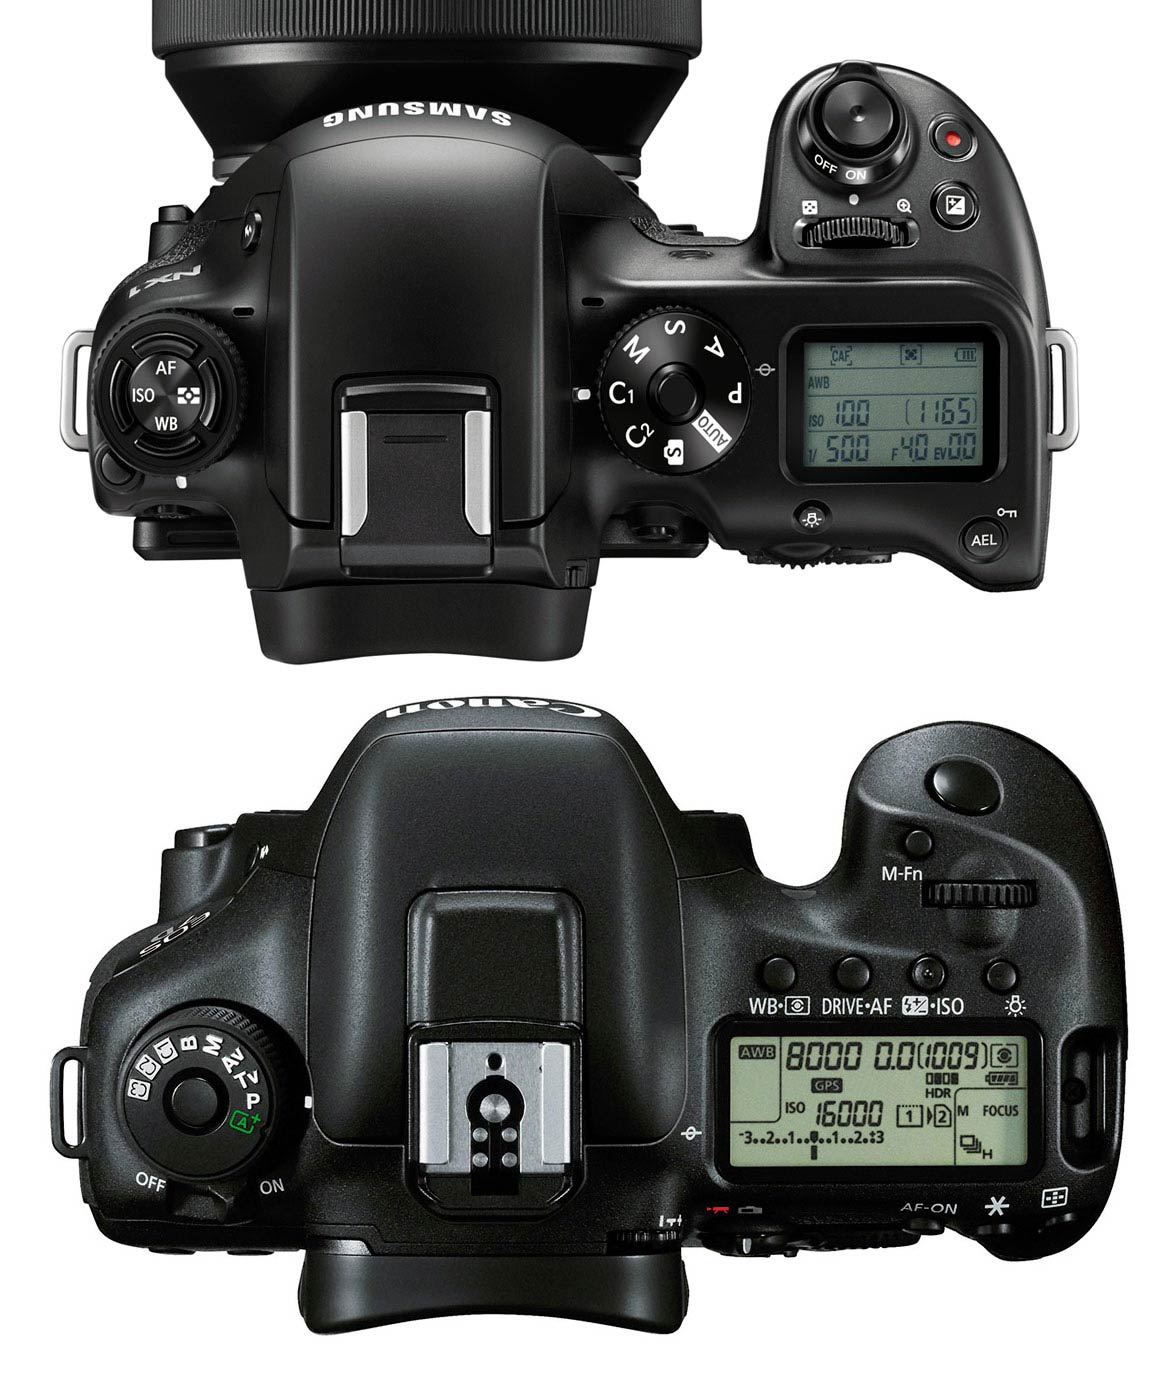 Samsung NX1 and Canon 7D Mark II top view